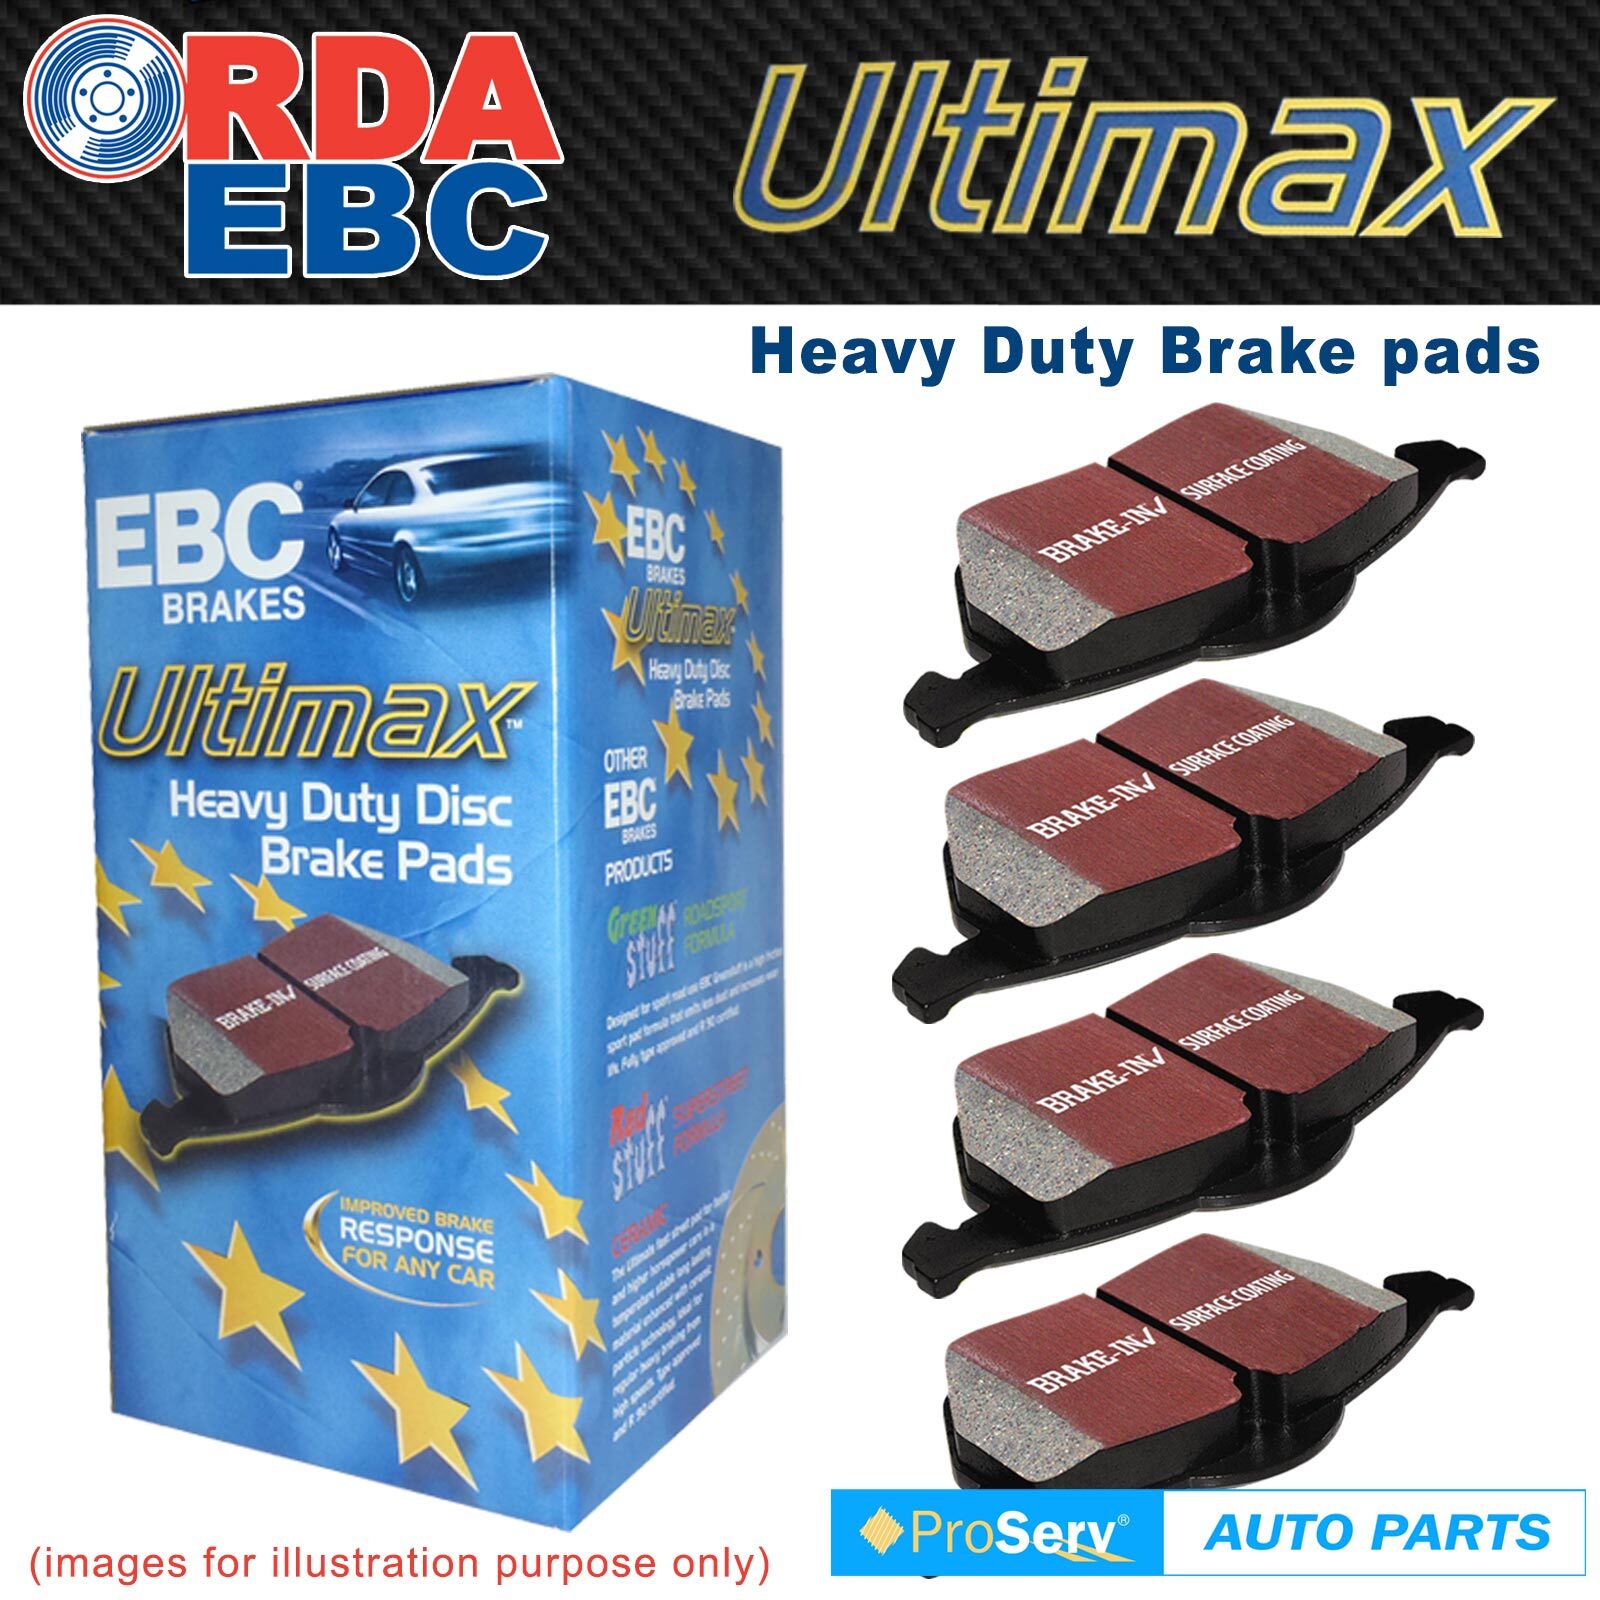 DPX2047 EBC Ultimax Rear Brake Pads for BMW 520 5 Series 2.0 TD F10 2010 